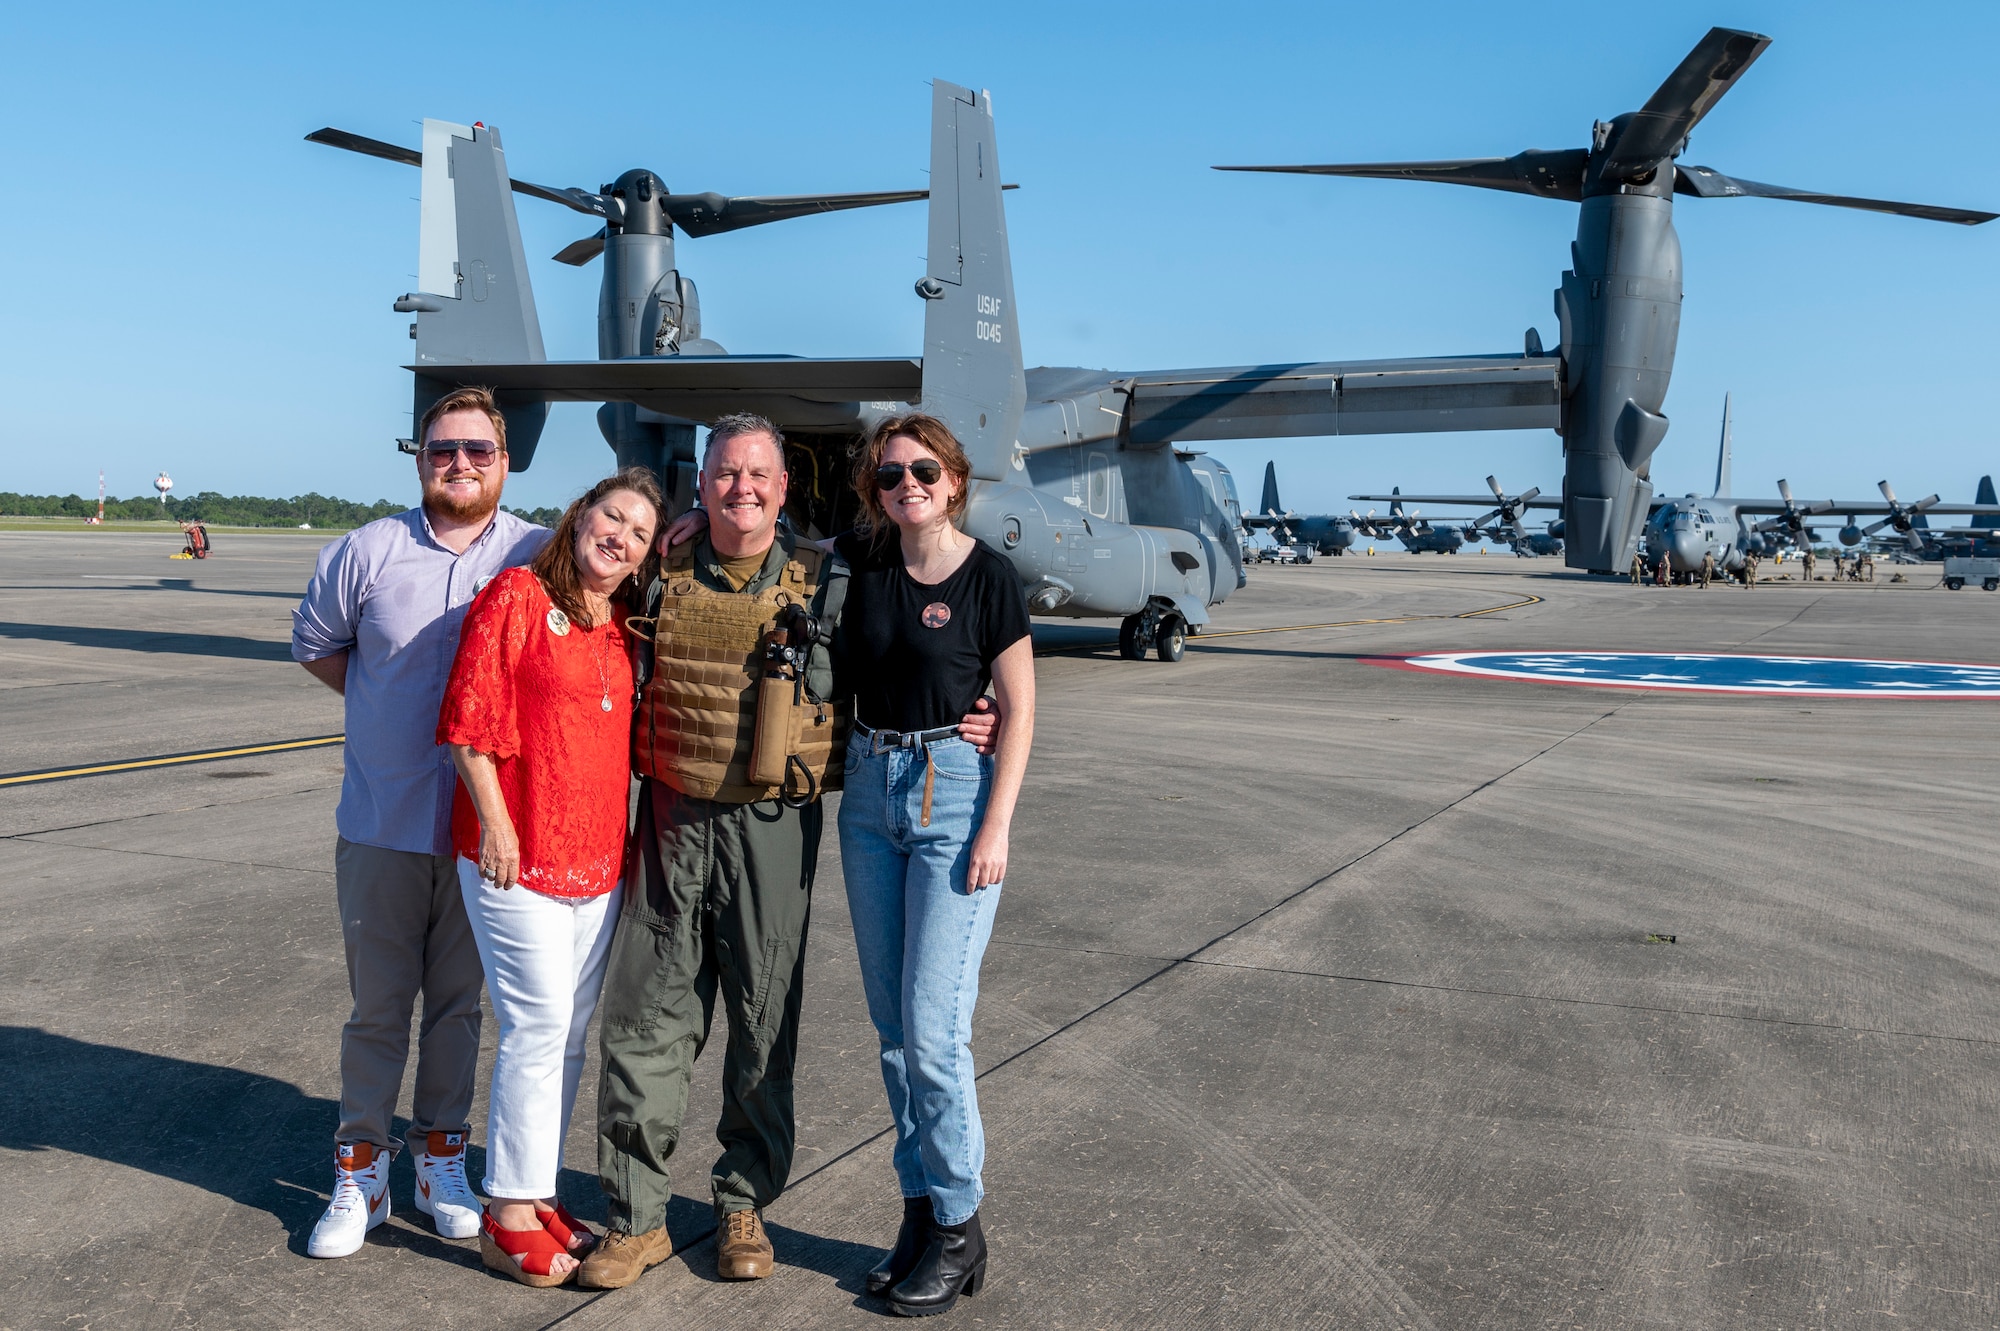 U.S. Air Force Lt. Gen. Brad Webb, commander of Air Education and Training Command, poses with his family in front of a CV-22 Osprey following his fini-flight May 10, 2022 at Hurlburt Field, Fla.